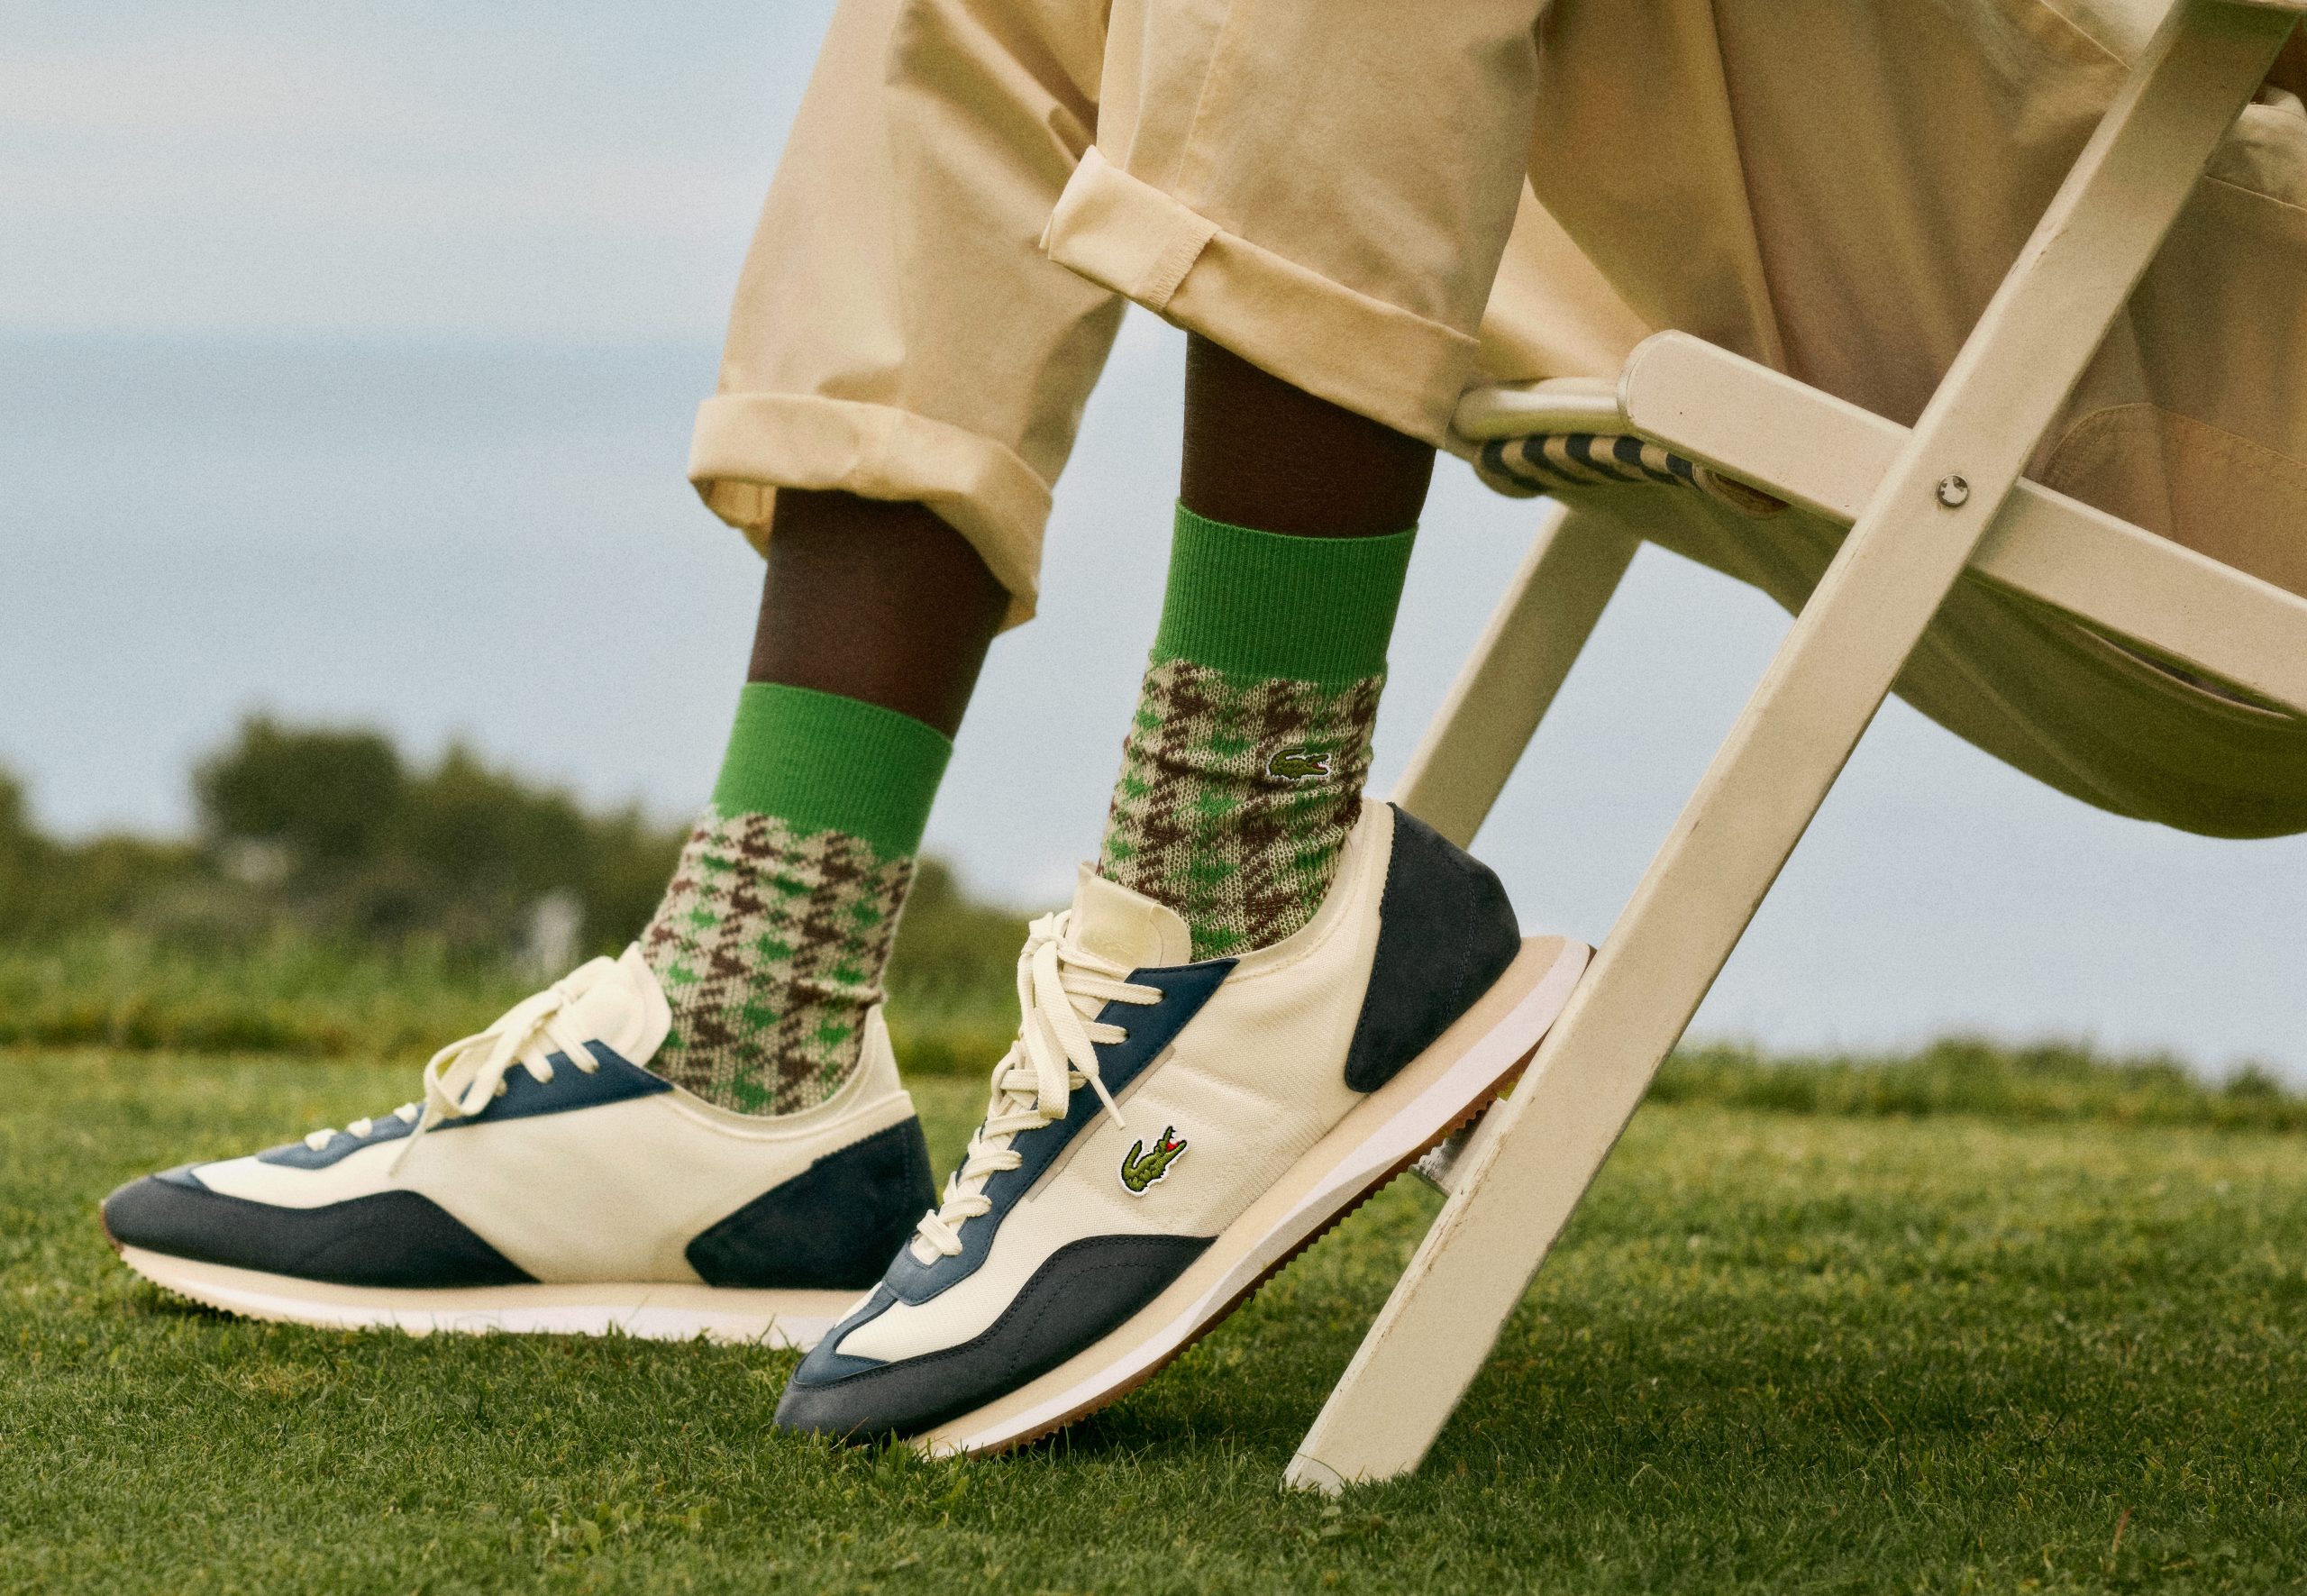 Lacoste Match Sneakers | Coolector